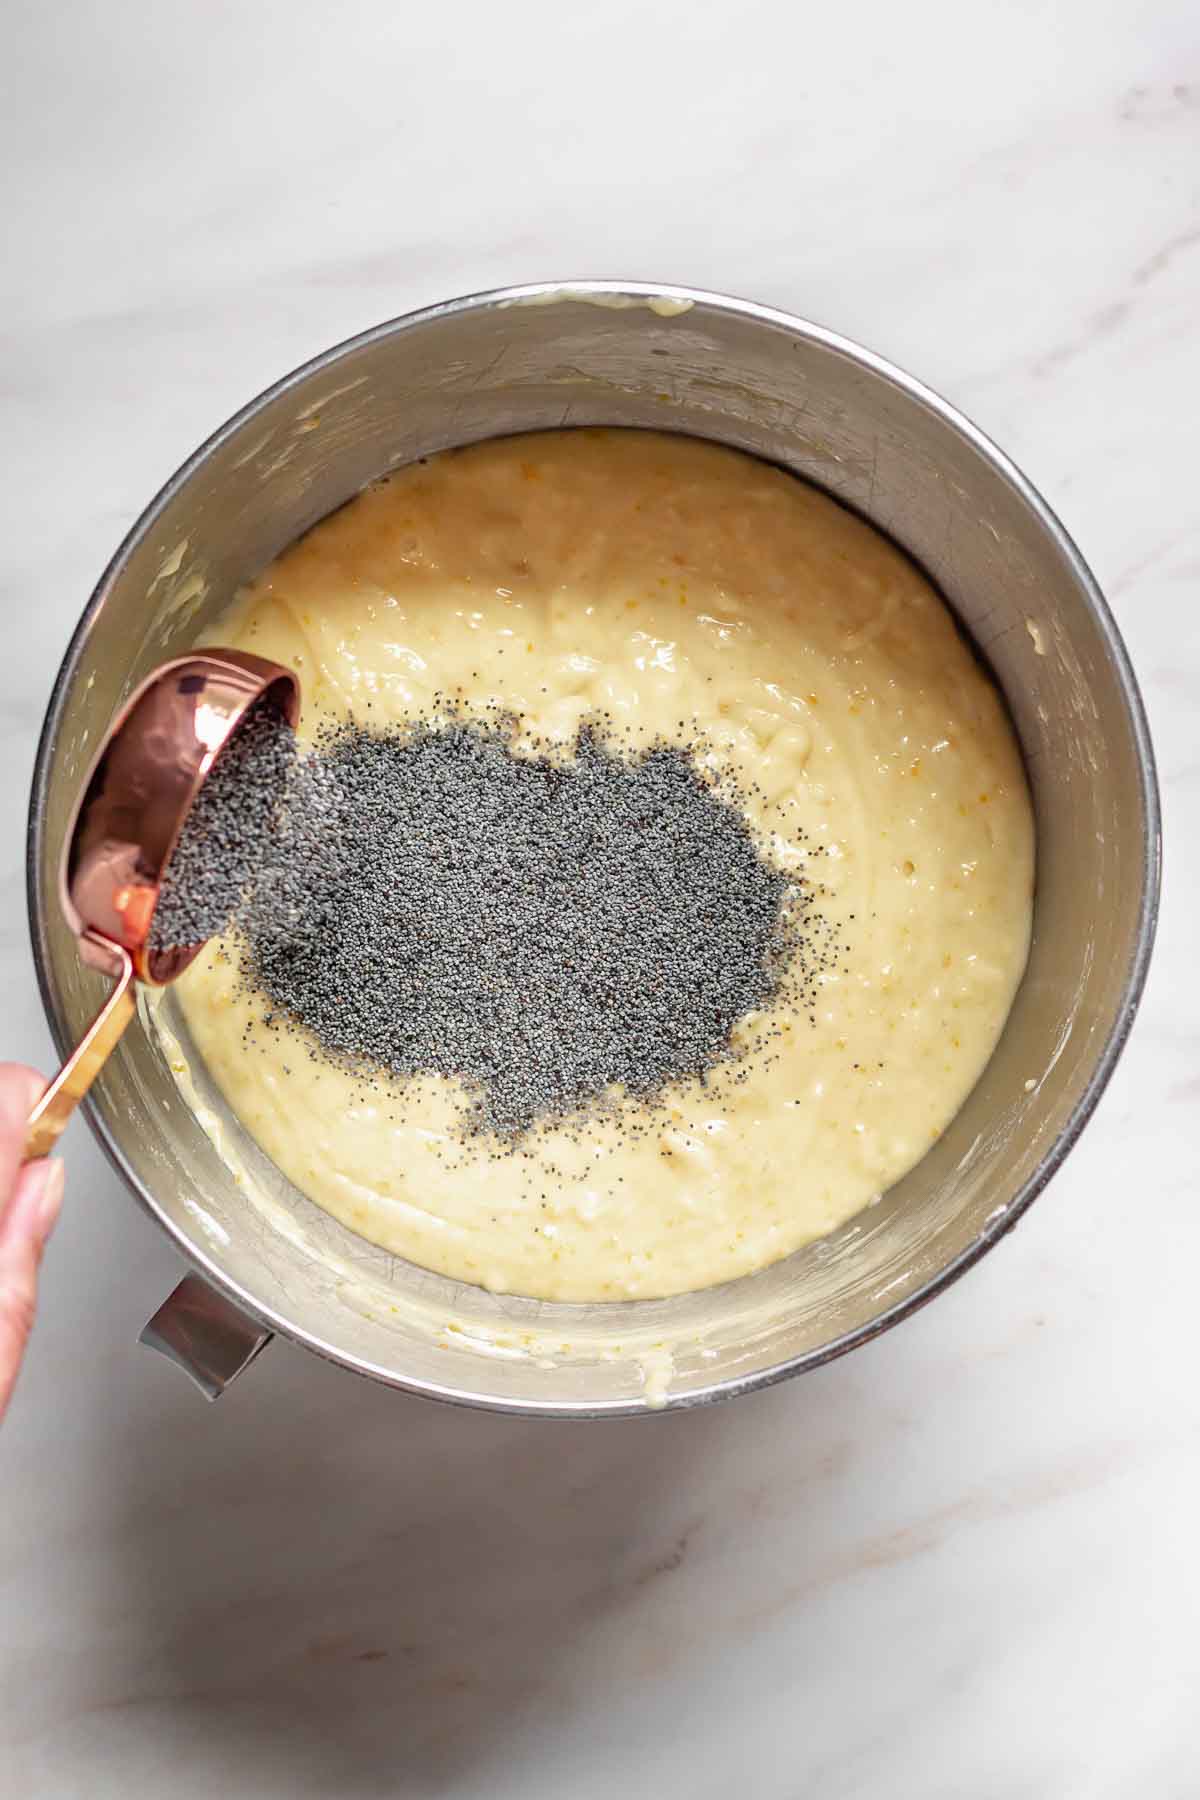 Poppy seeds pouring into cake batter.